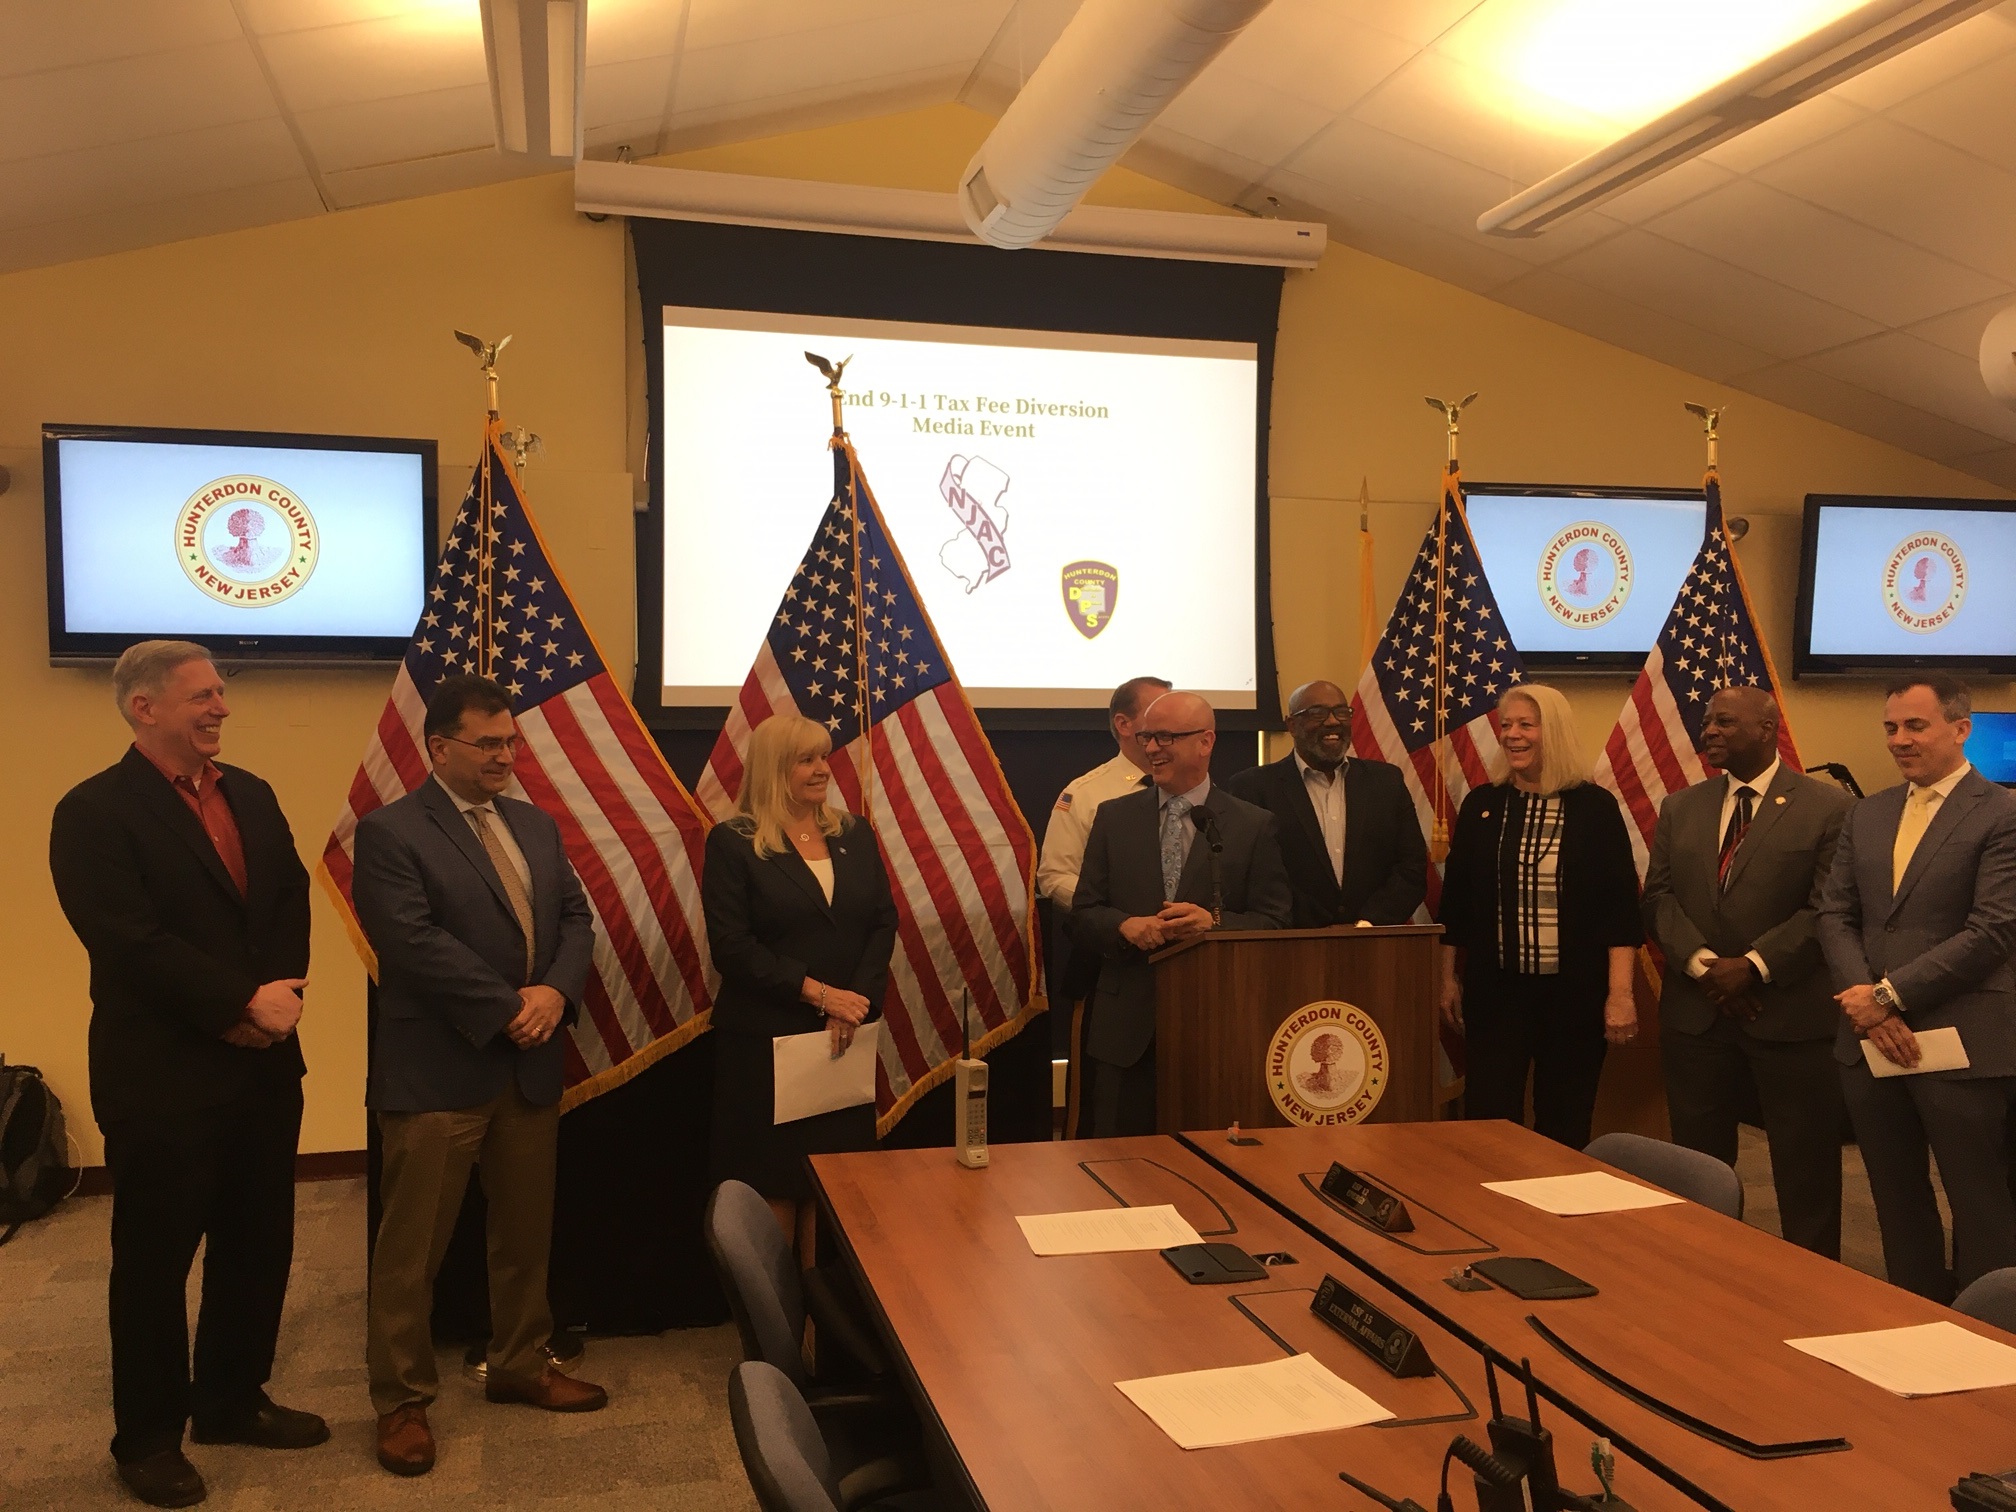 NJWA President Dominic Villecco Speaks at the “End the 911 Fee Diversion” Press Conference